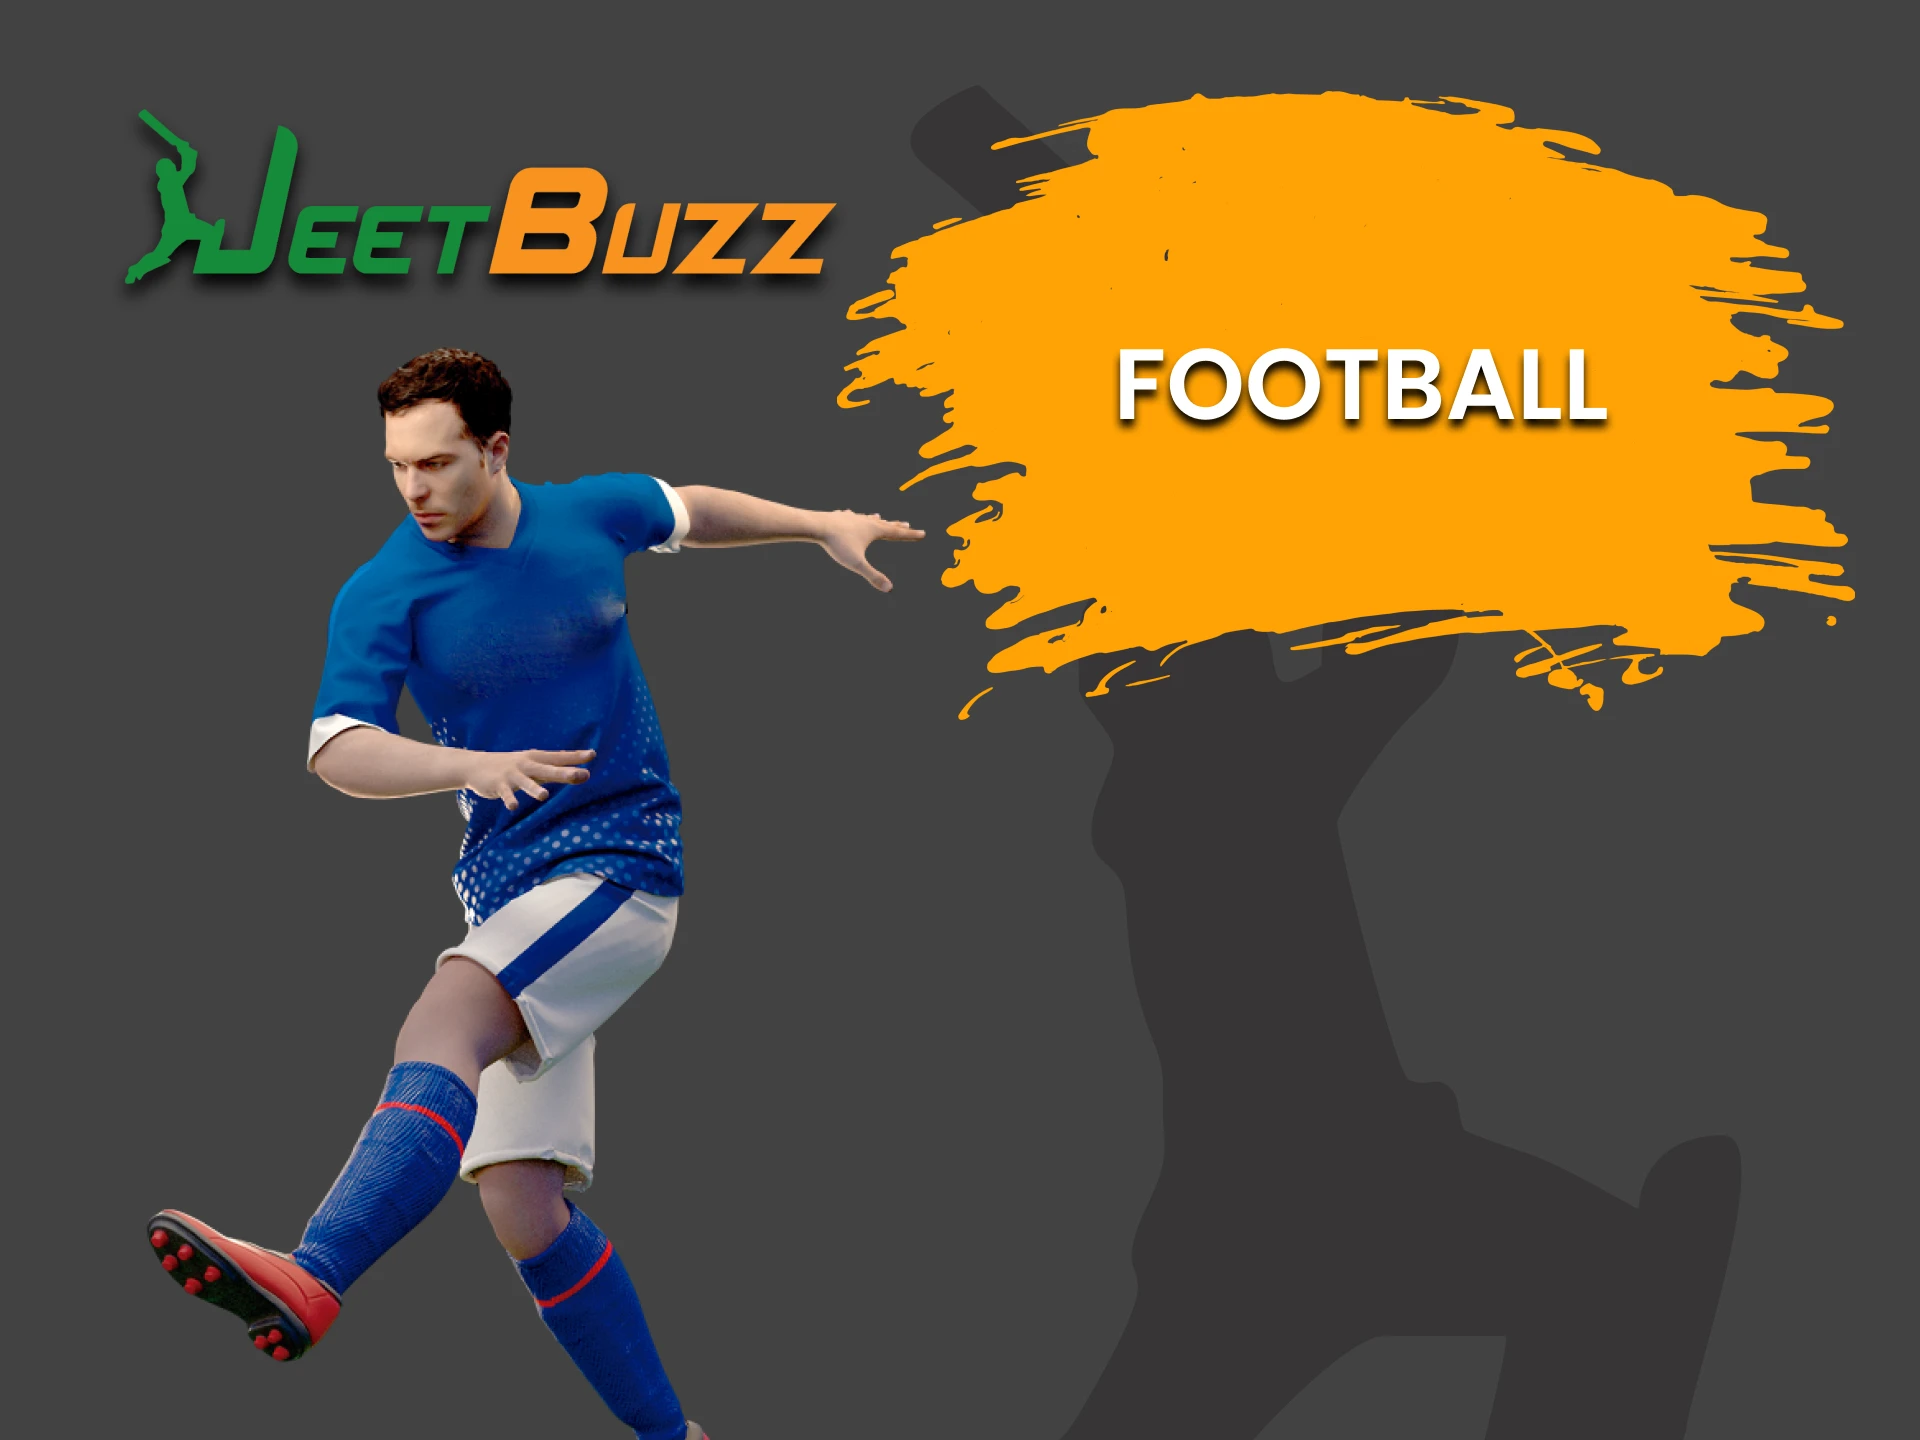 For virtual sports betting from JeetBuzz, choose Football.